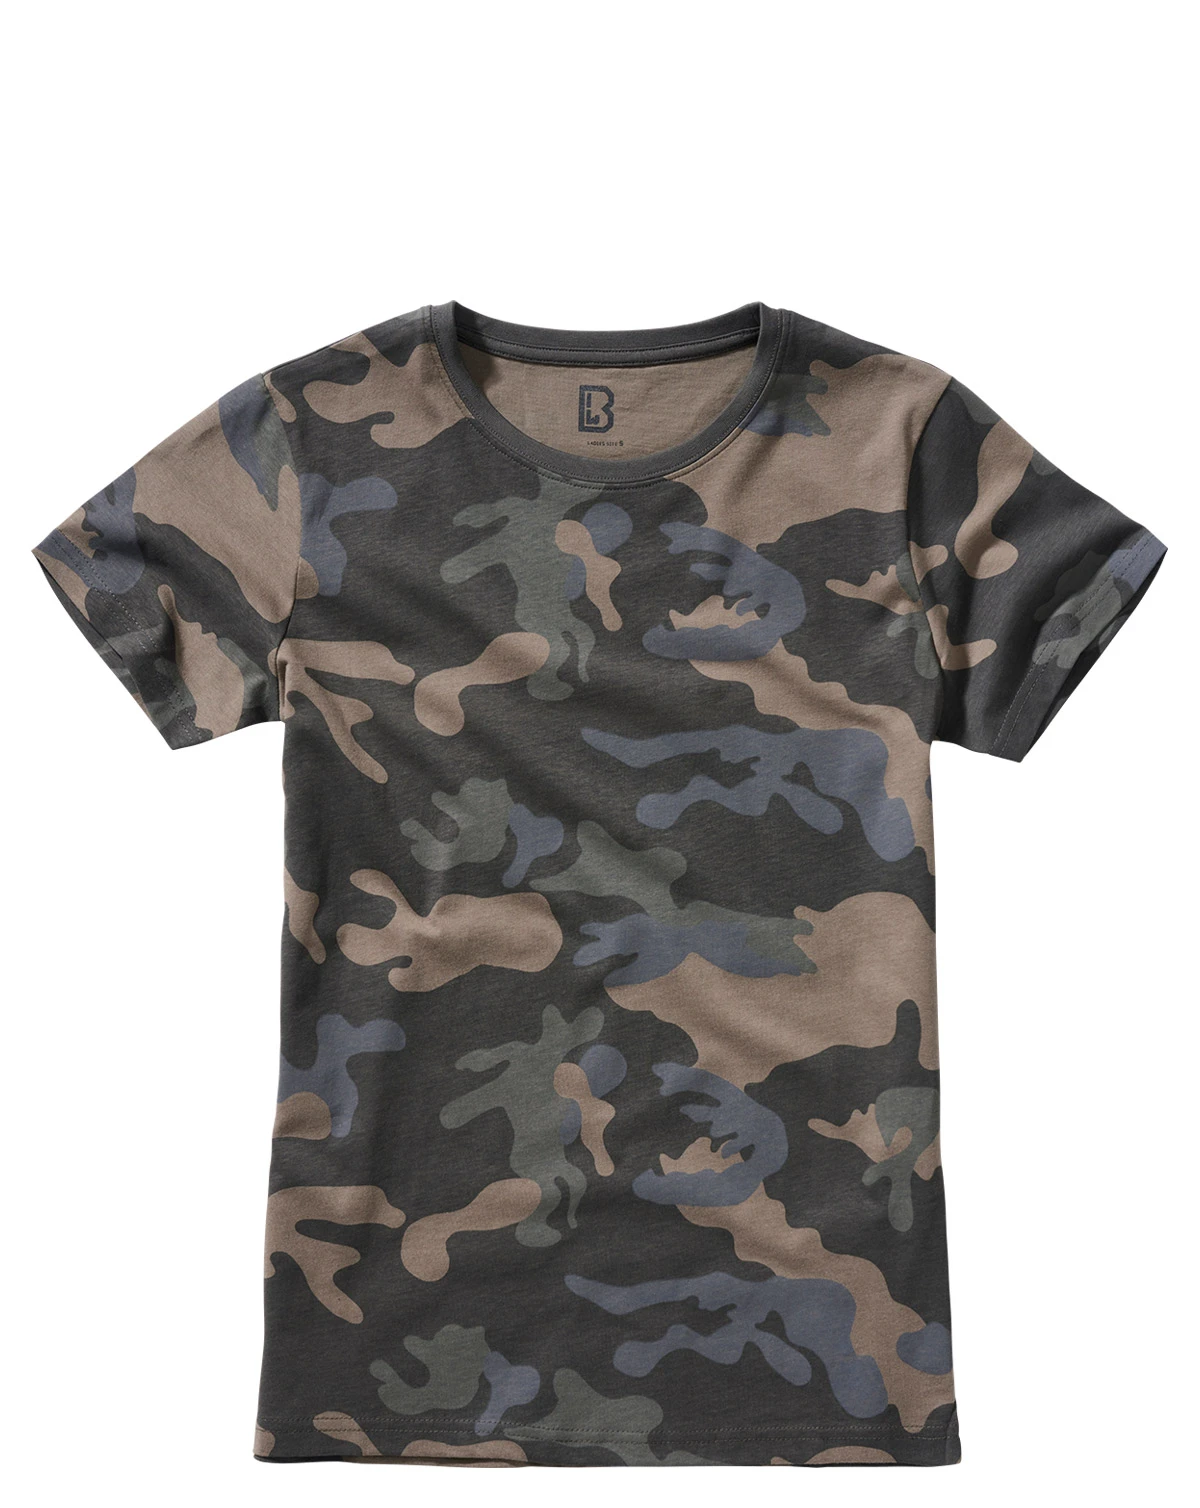 Brandit　Star　T-shirts　Large　Selection　Army